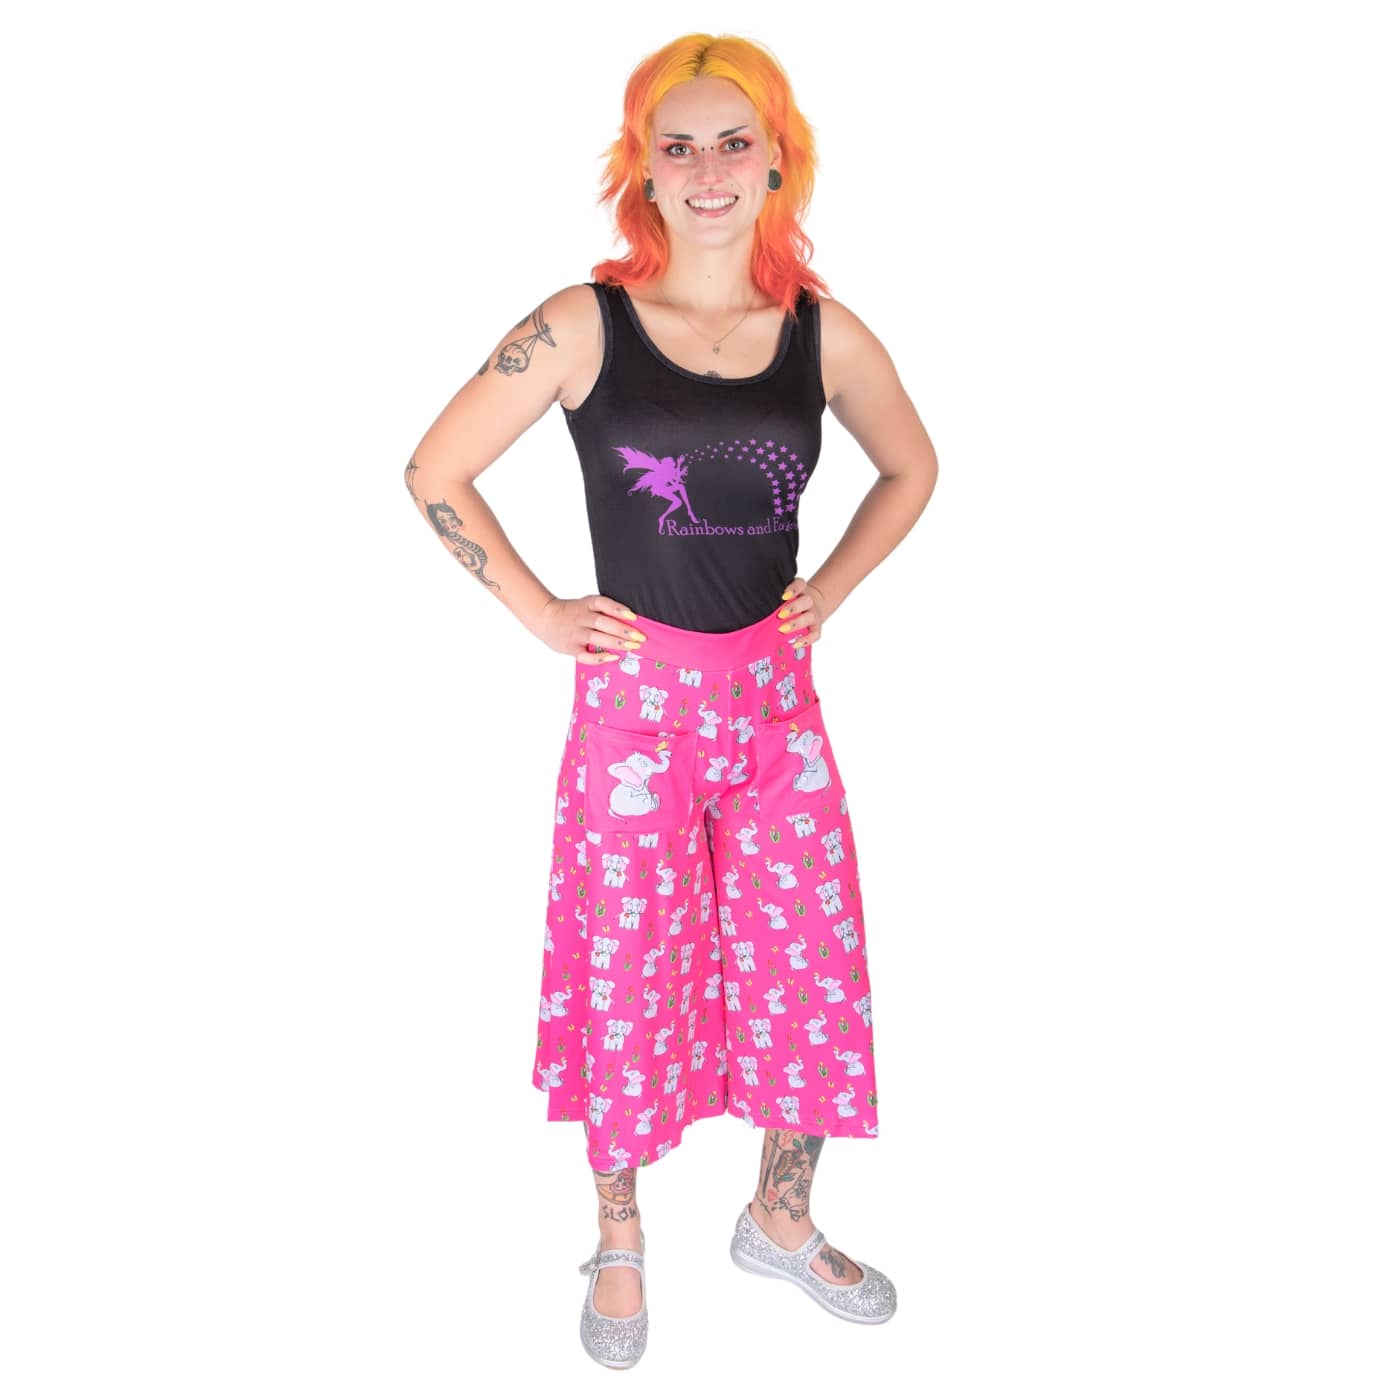 Parade Culottes by RainbowsAndFairies.com.au (Elephant - Tulips - 34 Pants - Kitsch - Vintage Inspired - Animal Print - Cute - Hot Pink - Wide Leg Pants) - SKU: CL_CULTS_PARAD_ORG - Pic-03